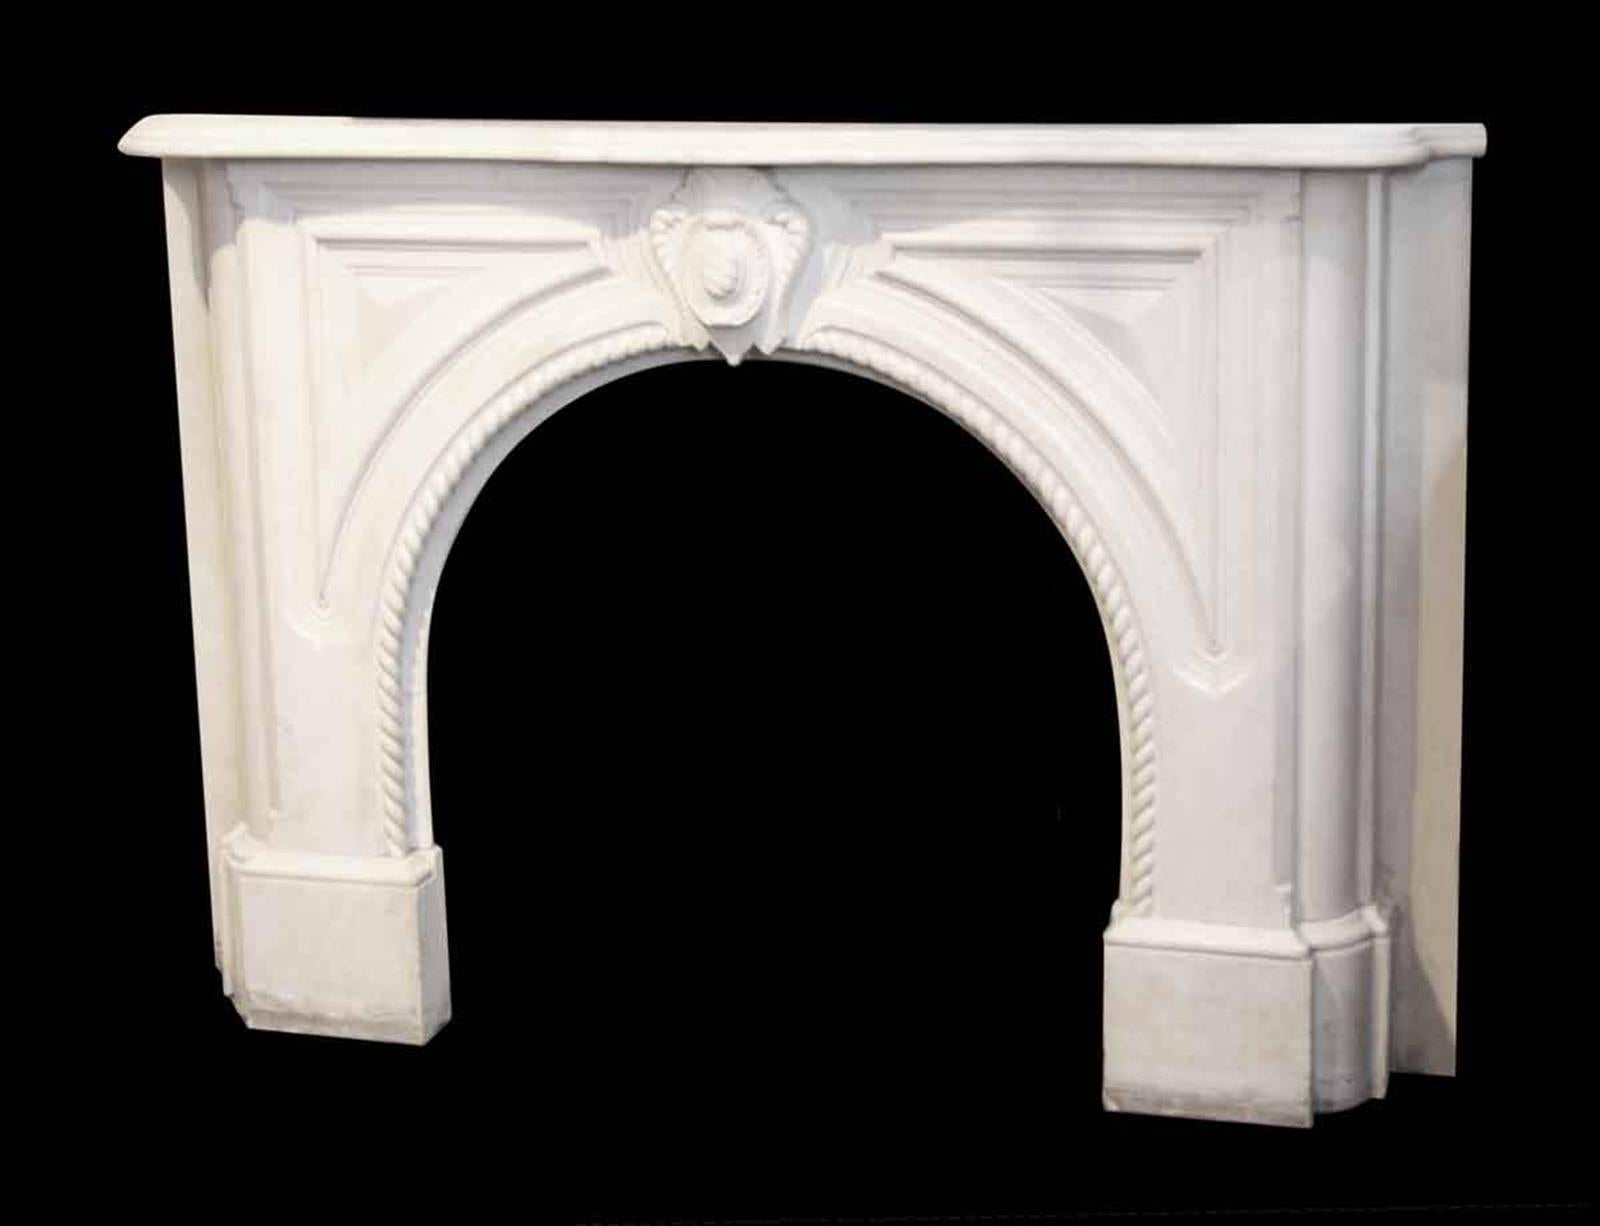 1905 white marble mantel with a beefy heavily carved profile and a rope design from Perry St in the West Village. This can be seen at our 302 Bowery location in Manhattan.